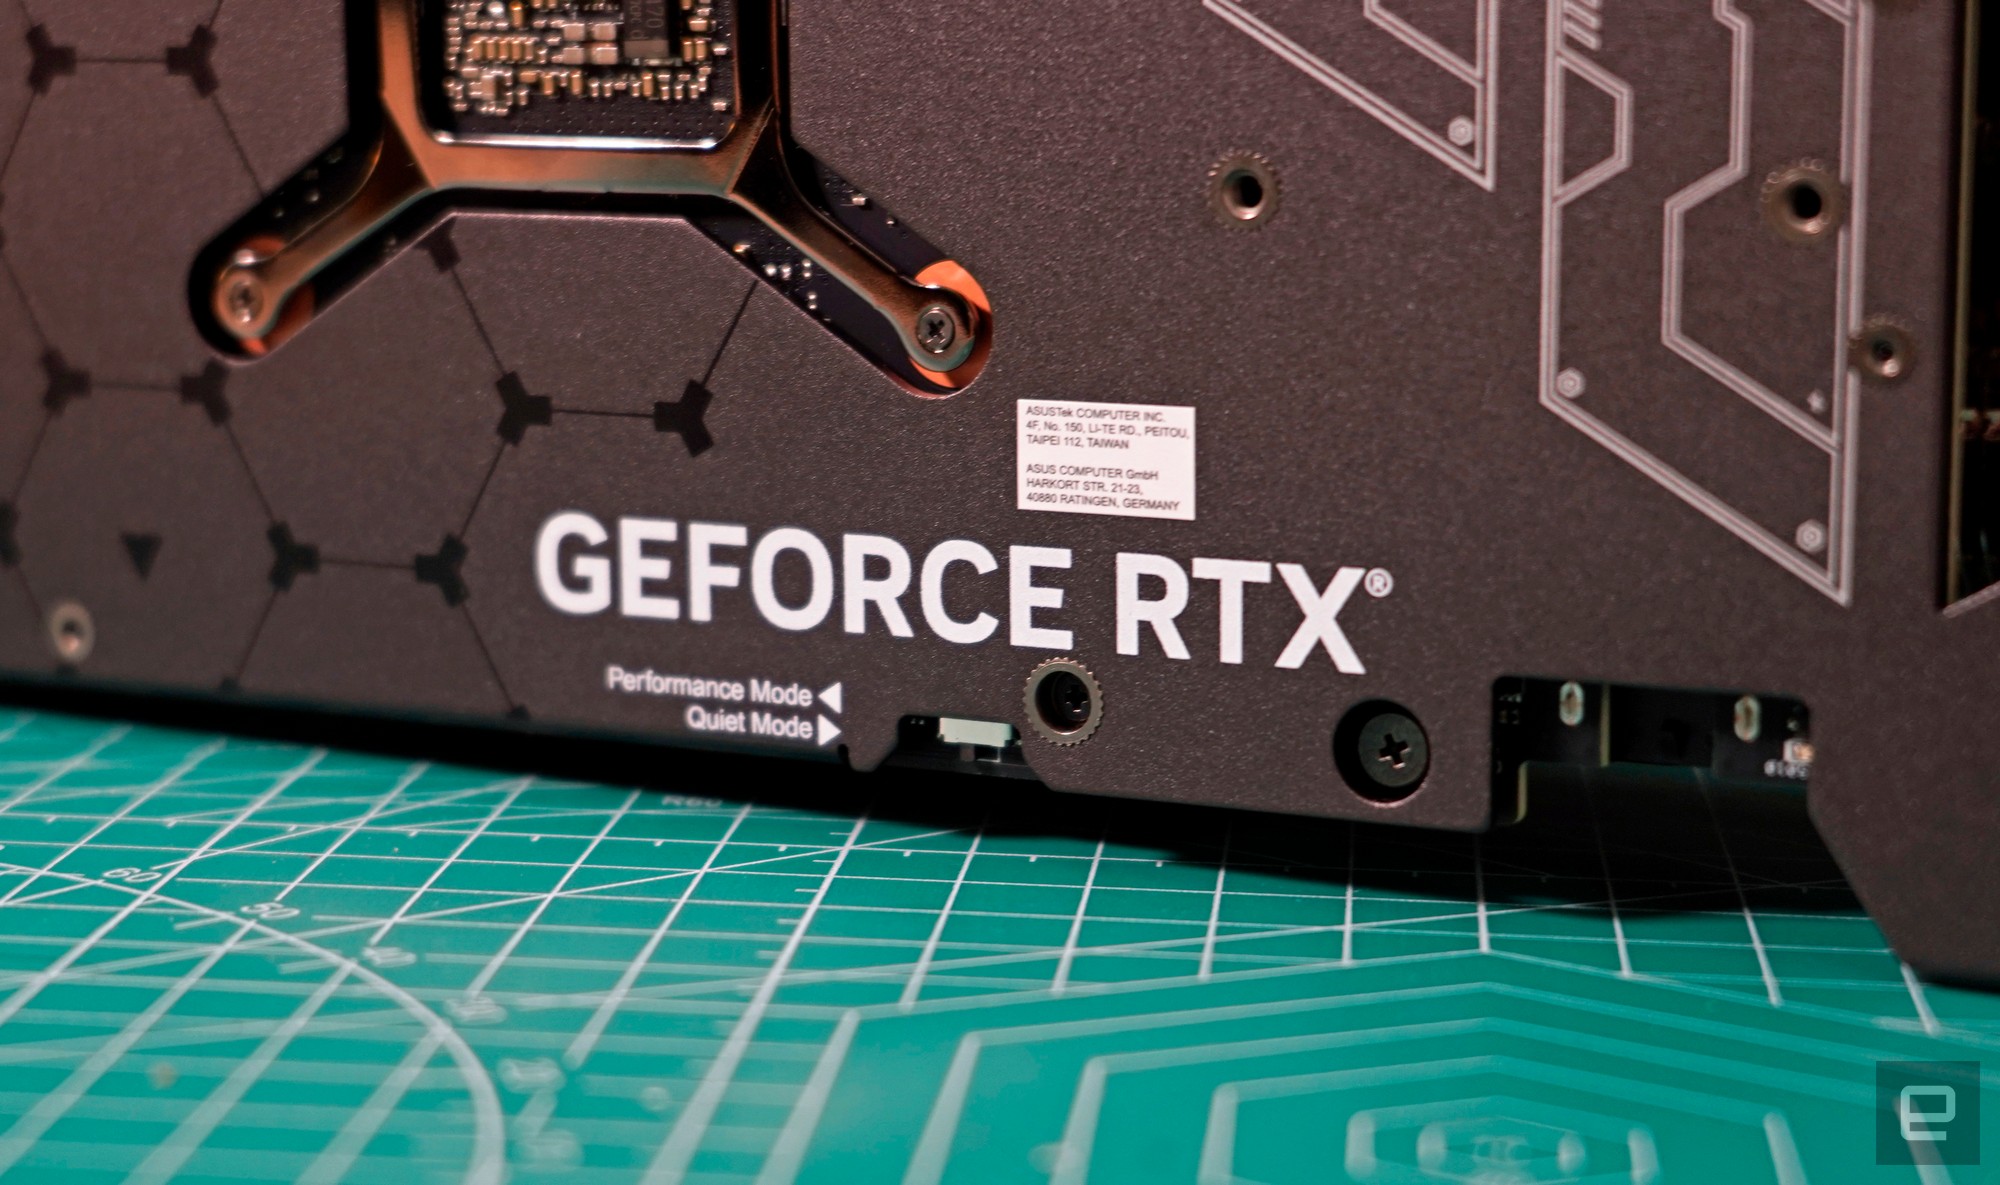 NVIDIA's GeForce RTX 4070 would cost $599